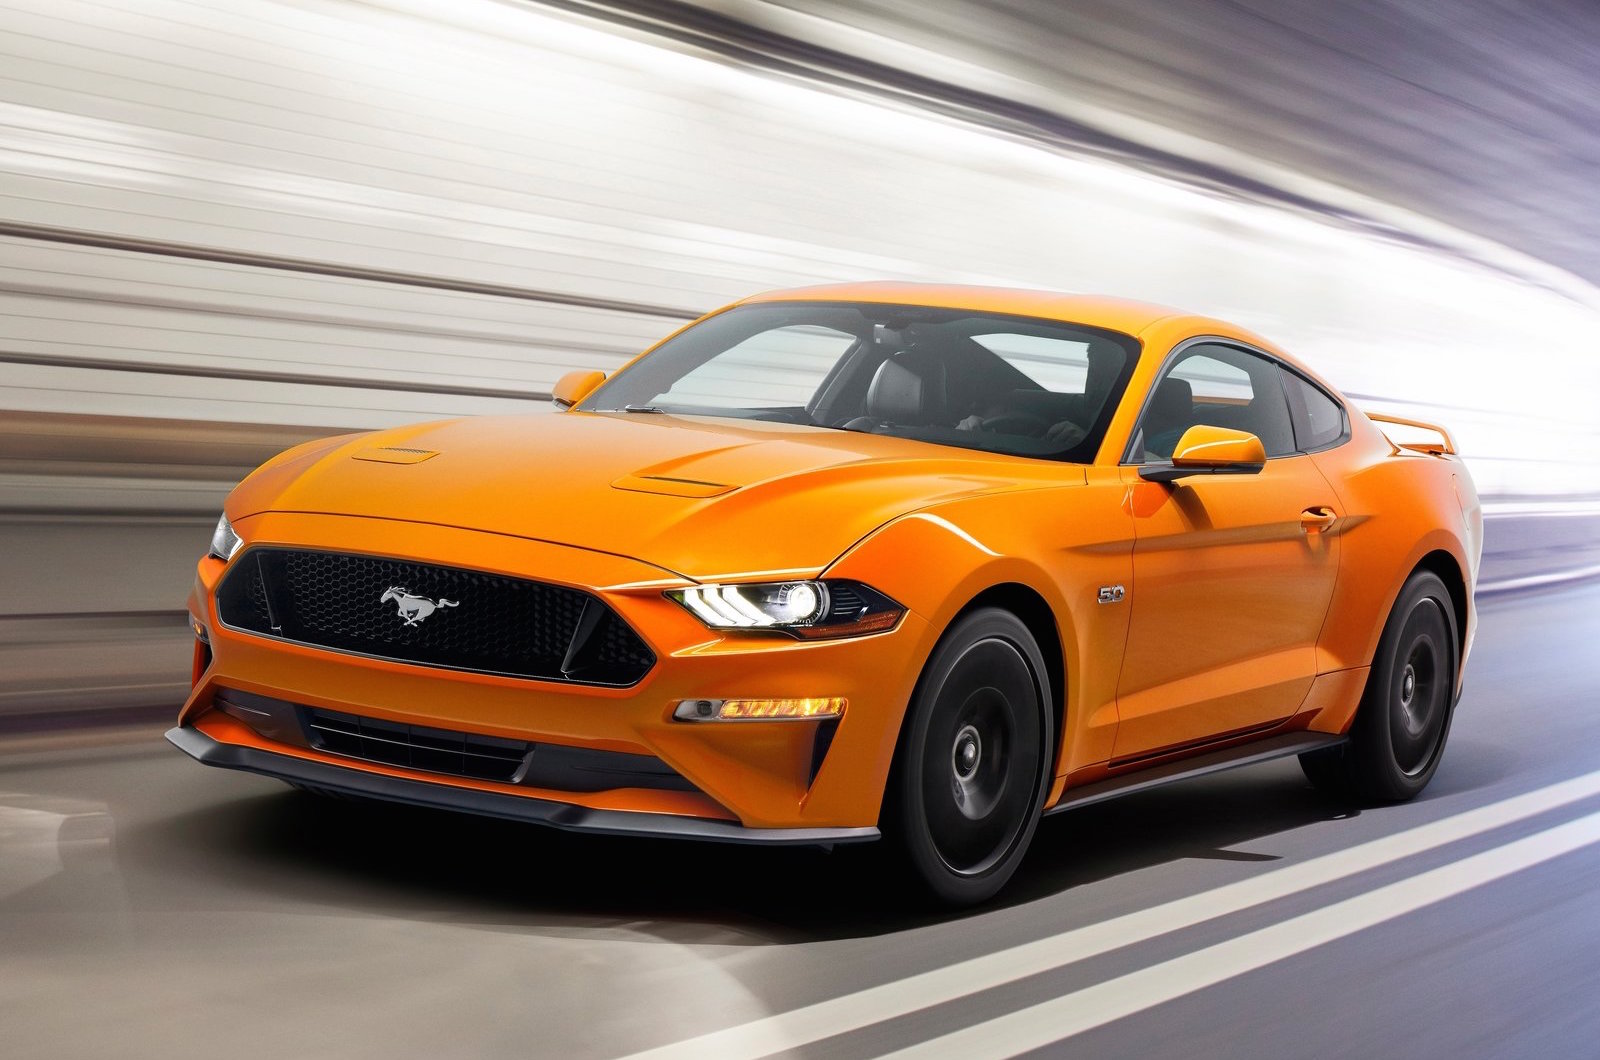 2018 Ford Mustang officially revealed, more power & tech